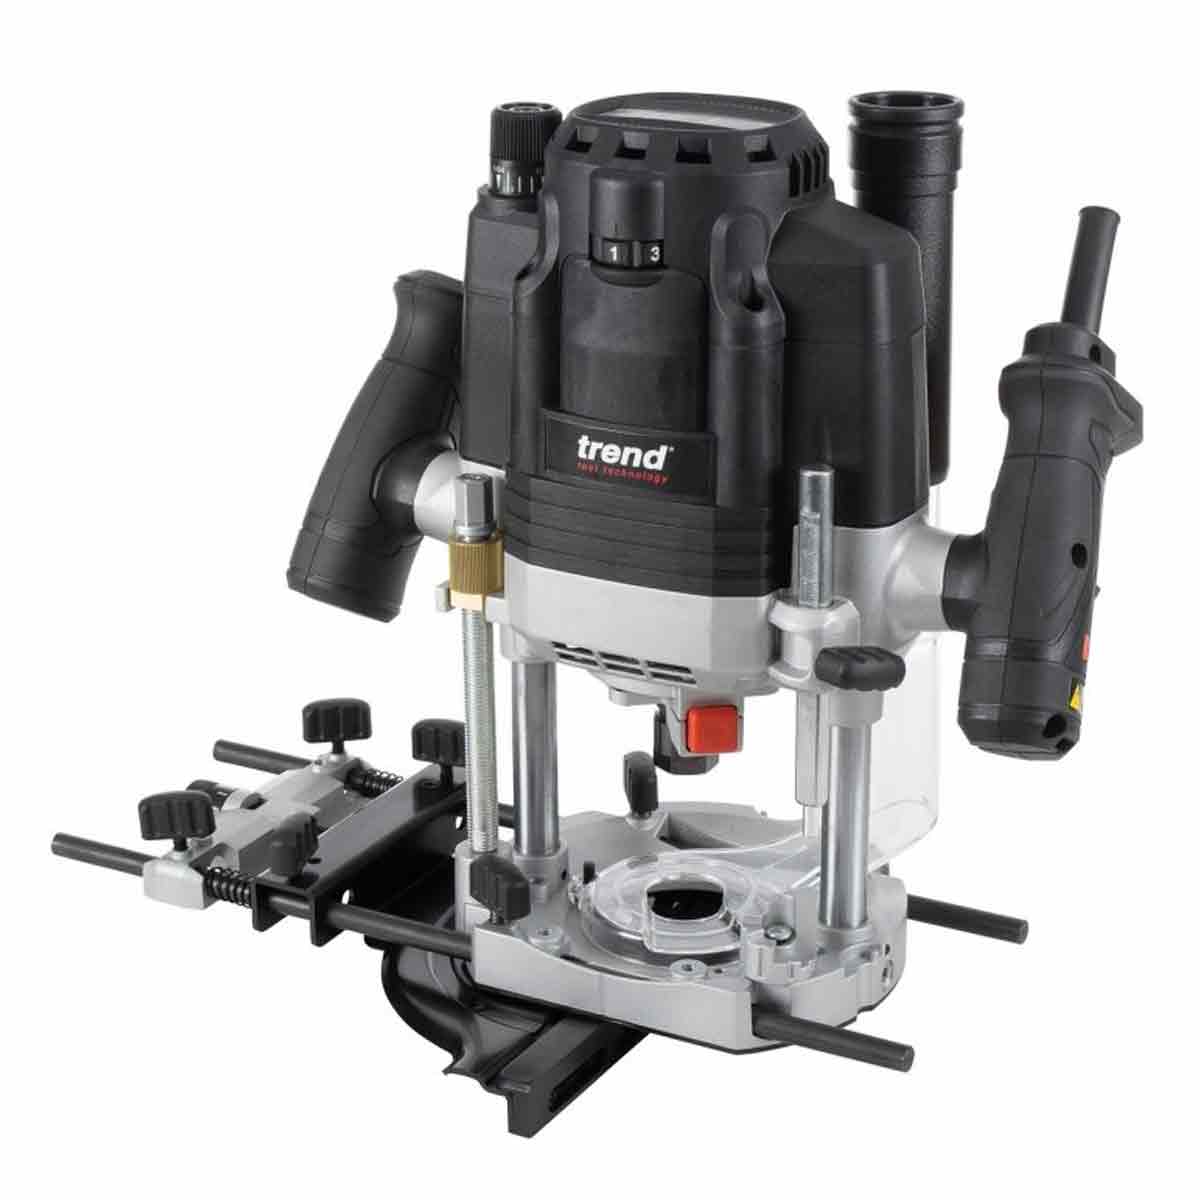 Trend T8ELK 1/2in Dual Mode Plunge Router 110V/2200W With Carry Case